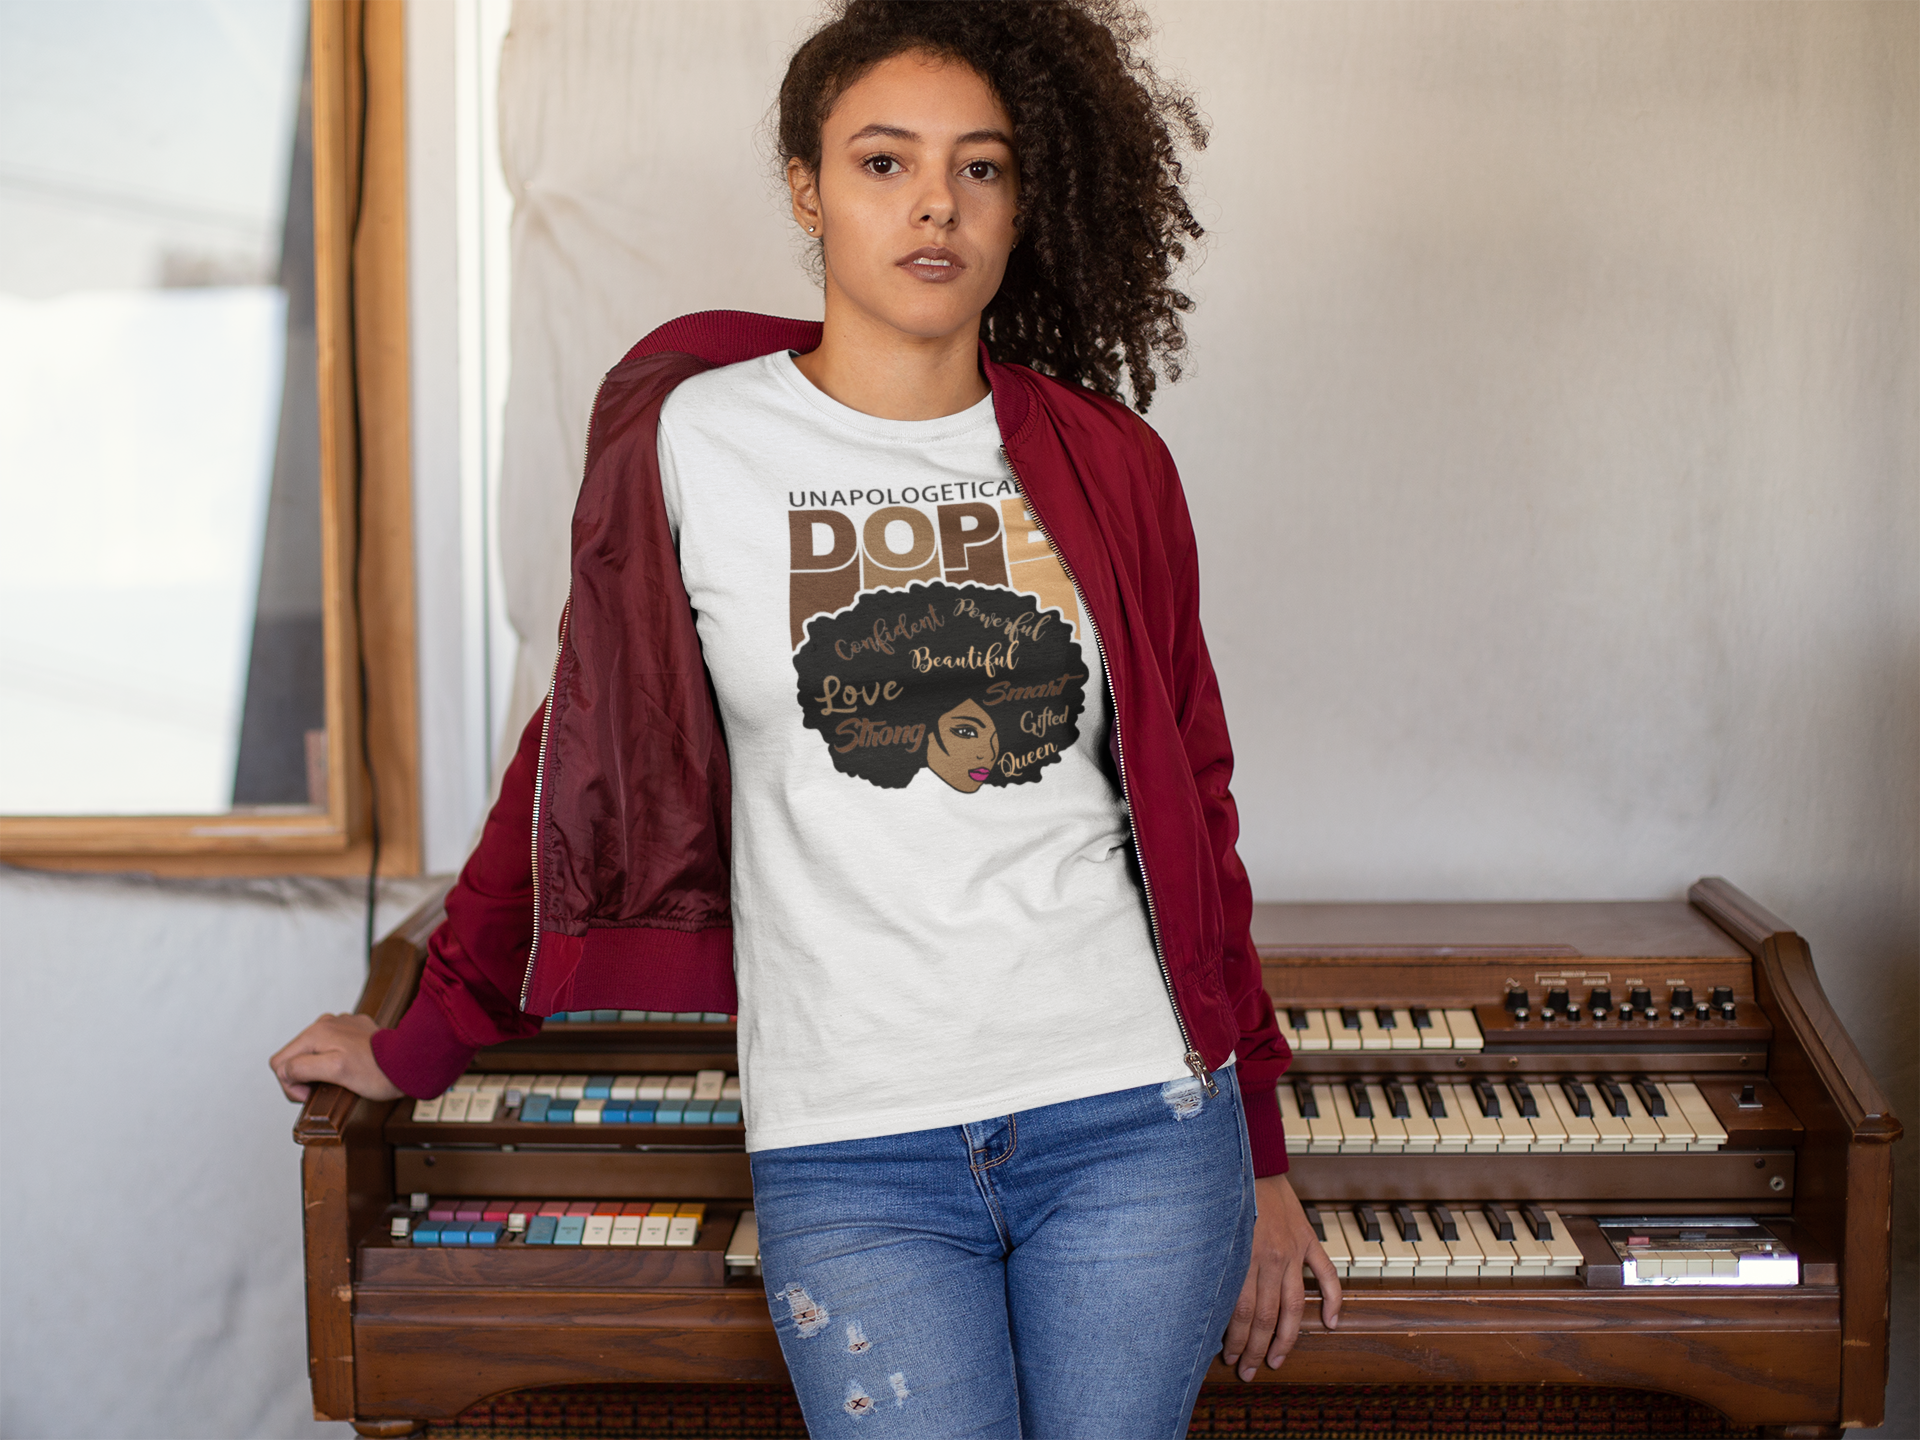 Unapologetically Dope tee